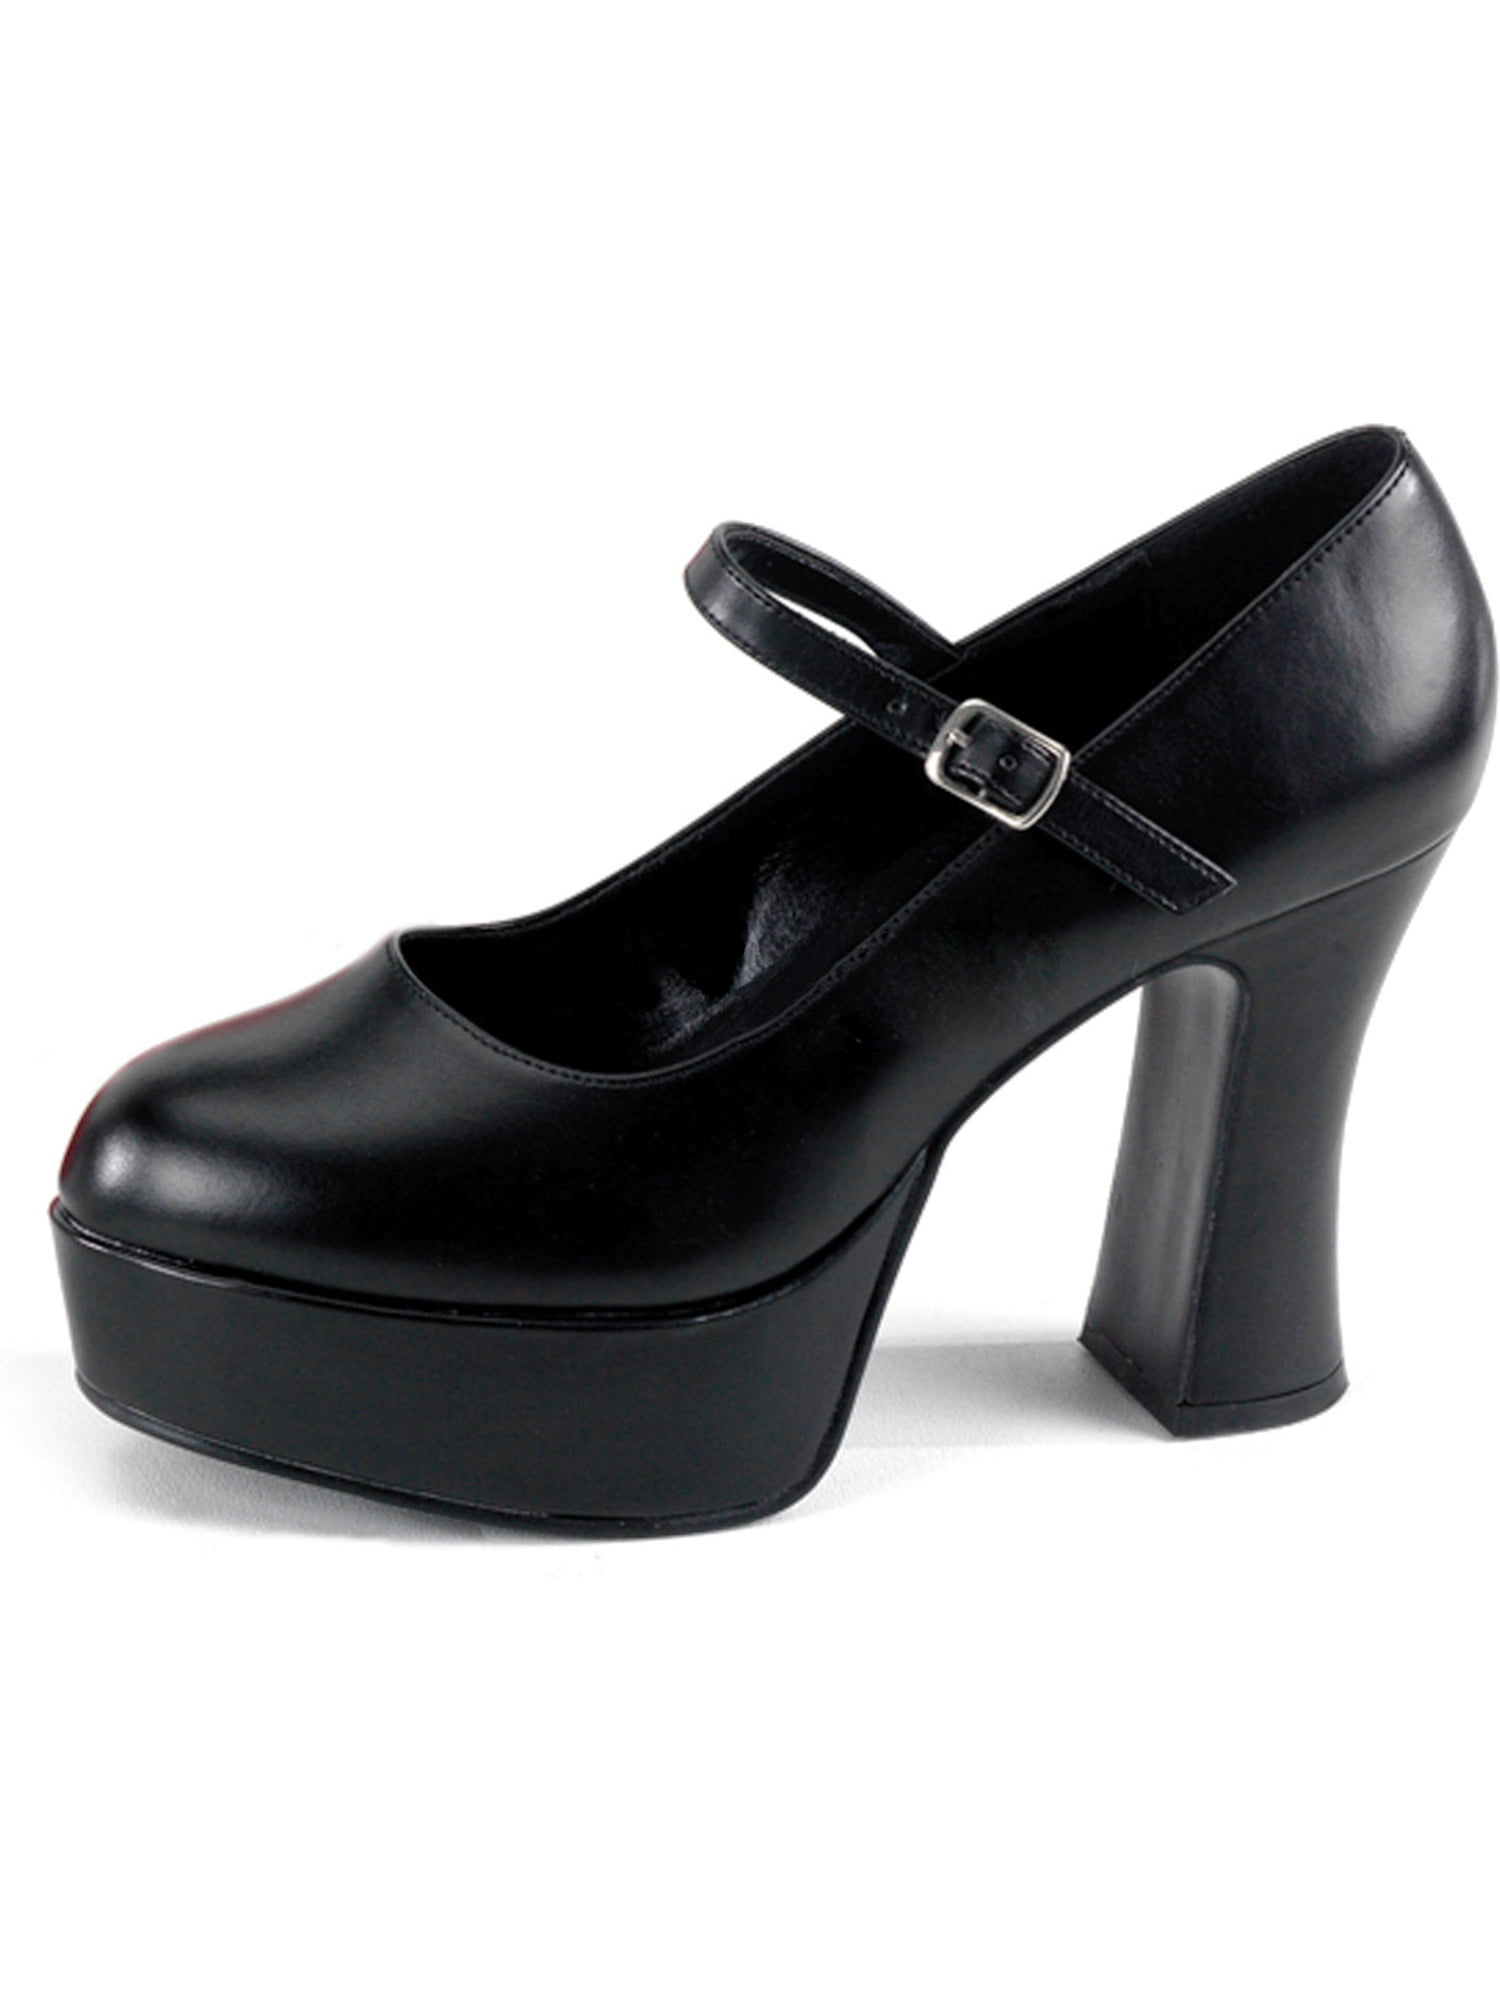 Buy > mary jane chunky heel shoes > in stock